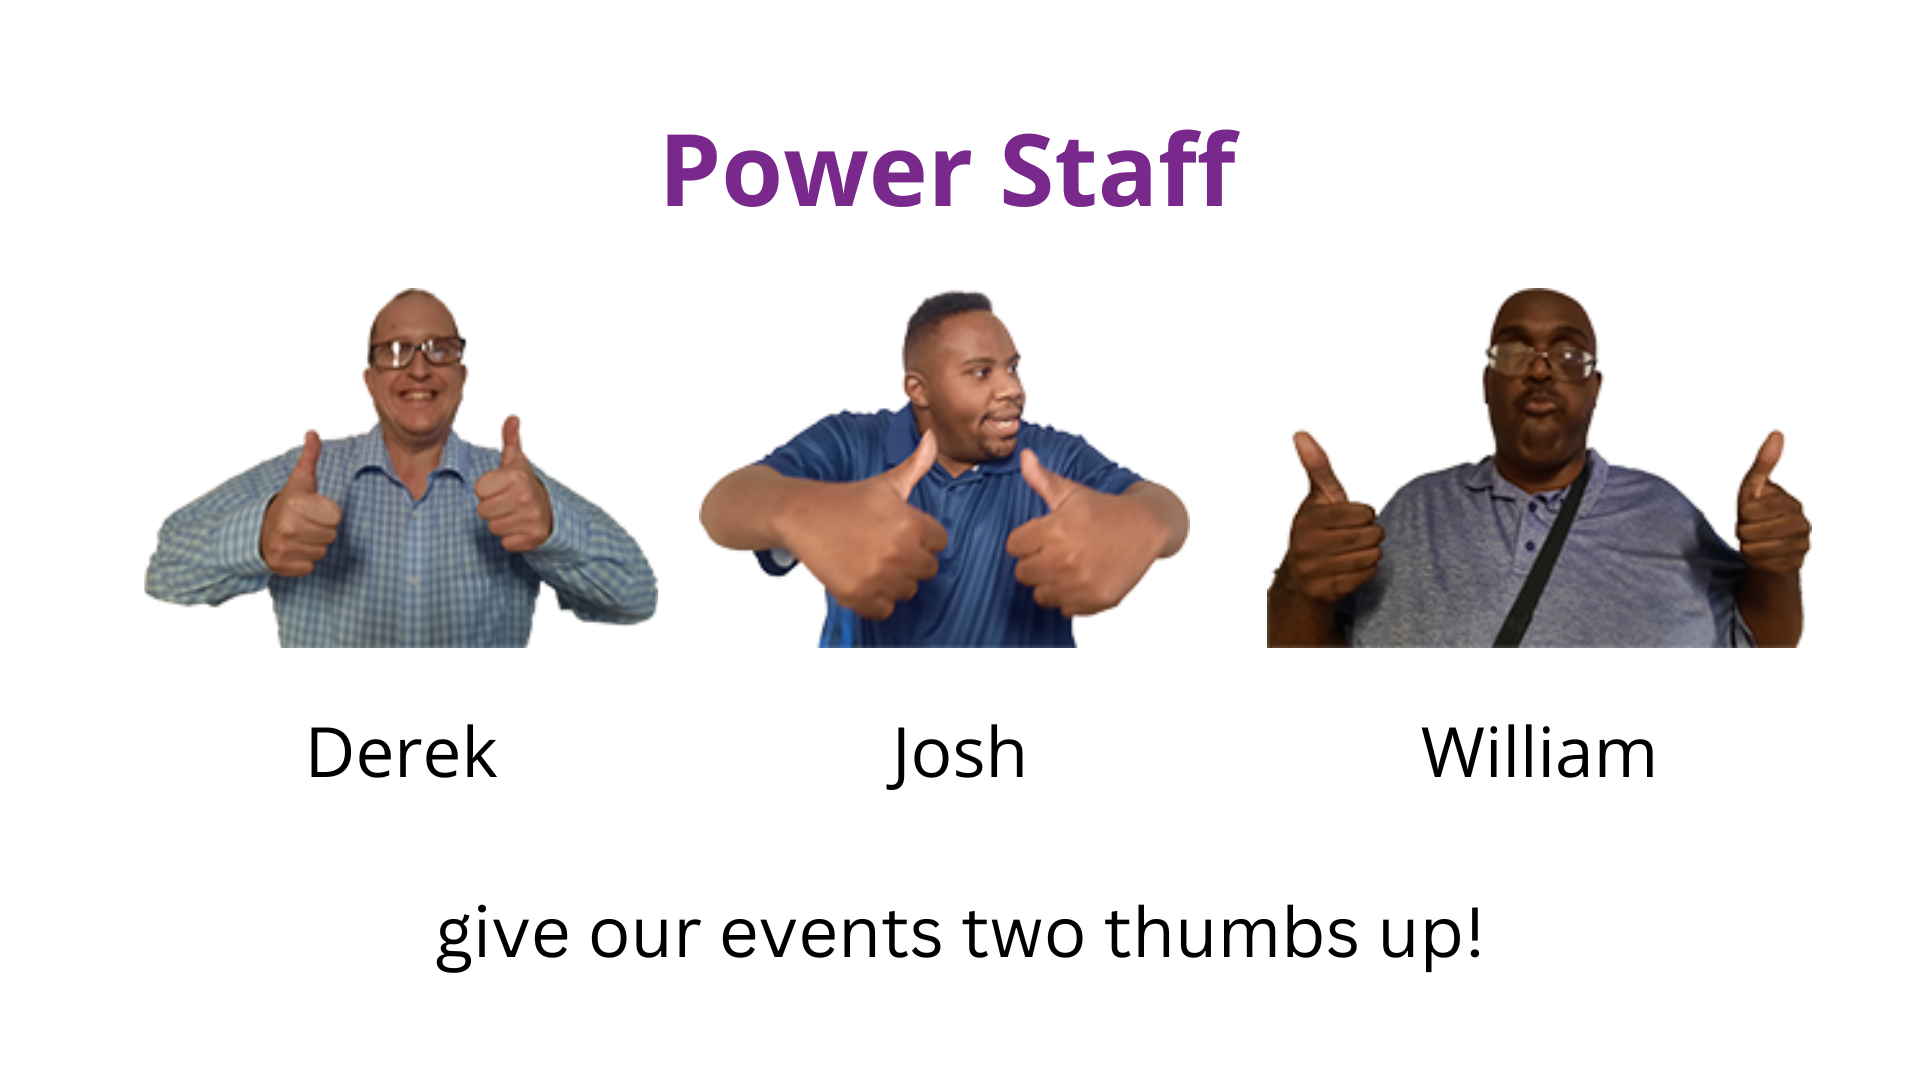 Banner with photos of Power Staff Derek, Josh, and William giving two thumbs up. Text reads: Power Staff Derek, Josh, and William give our events two thumbs up!